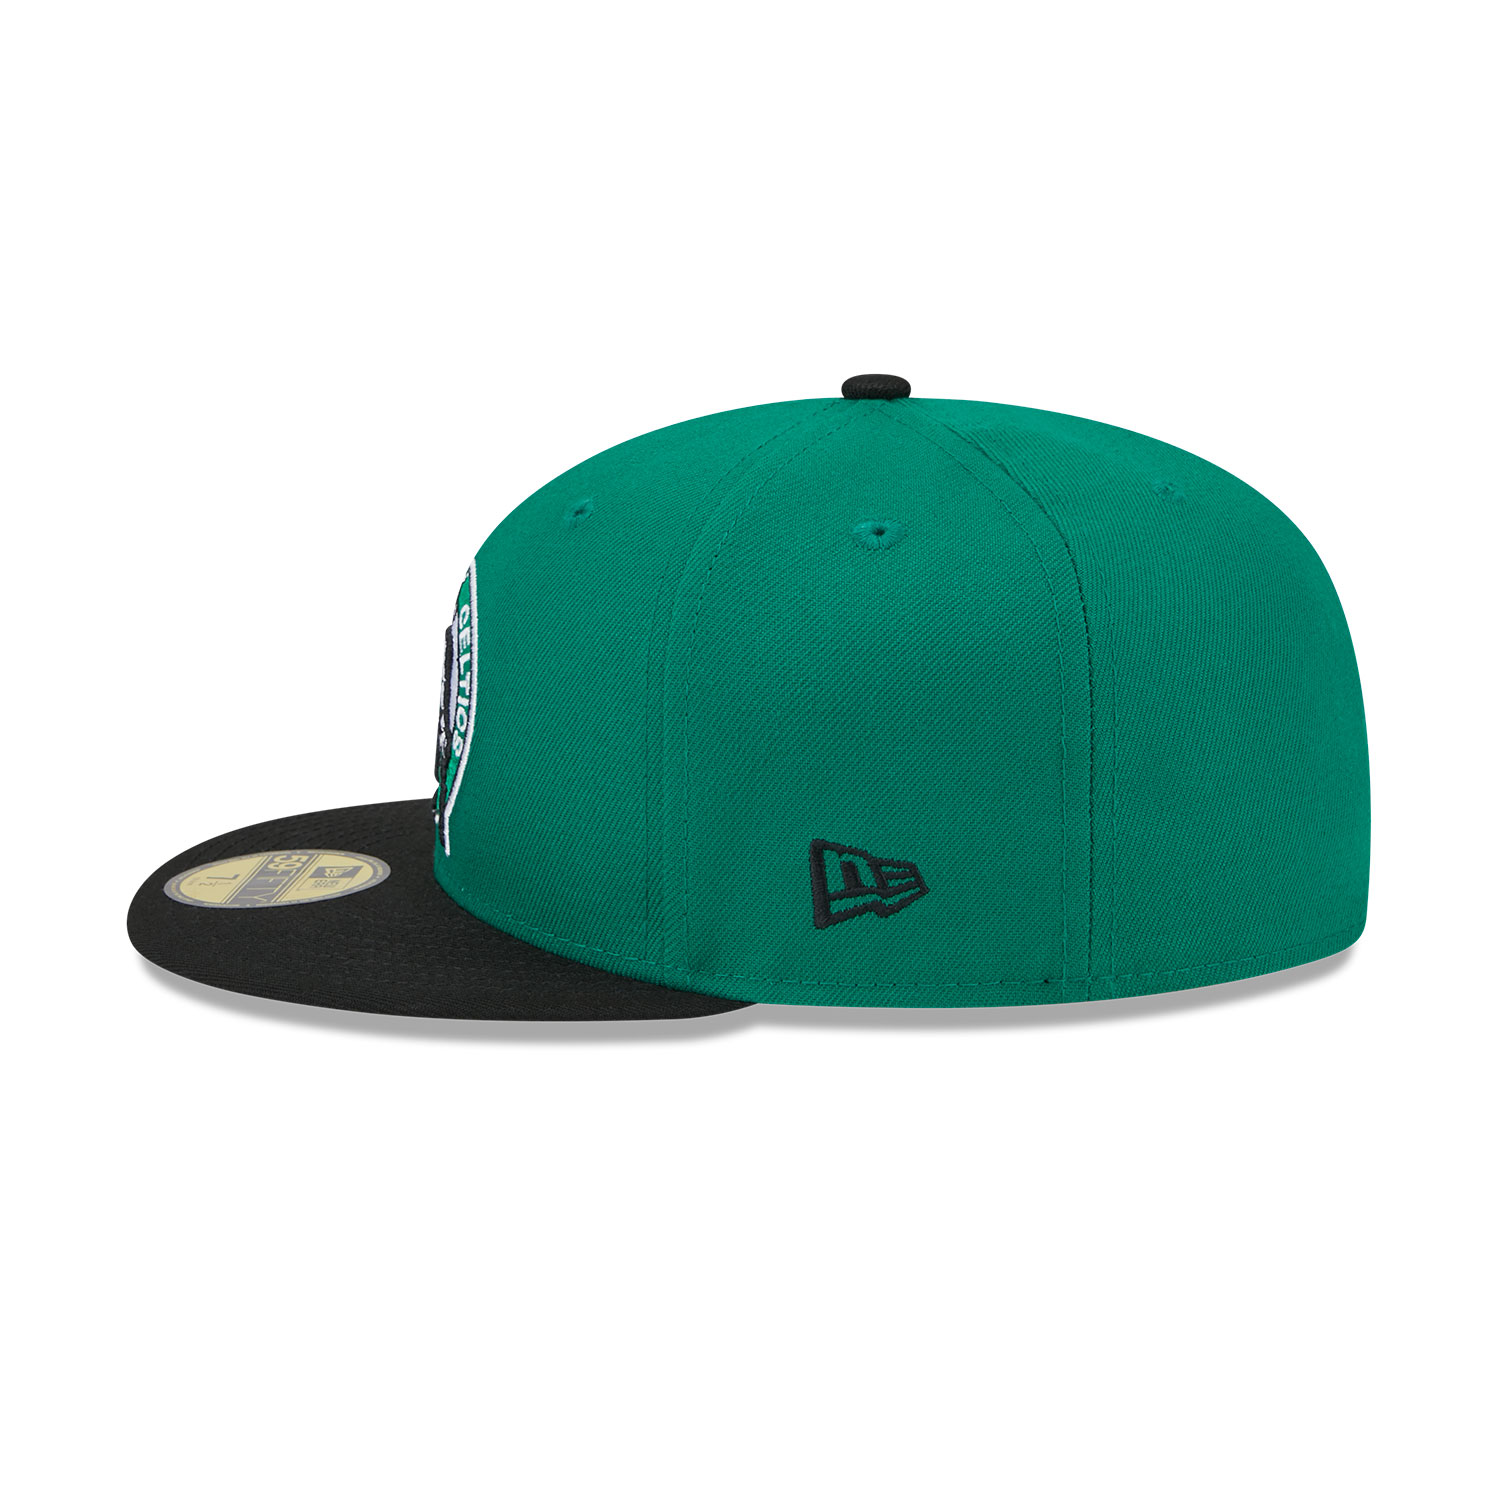 Boston Celtics NBA All Star Game Green 59FIFTY Fitted Cap